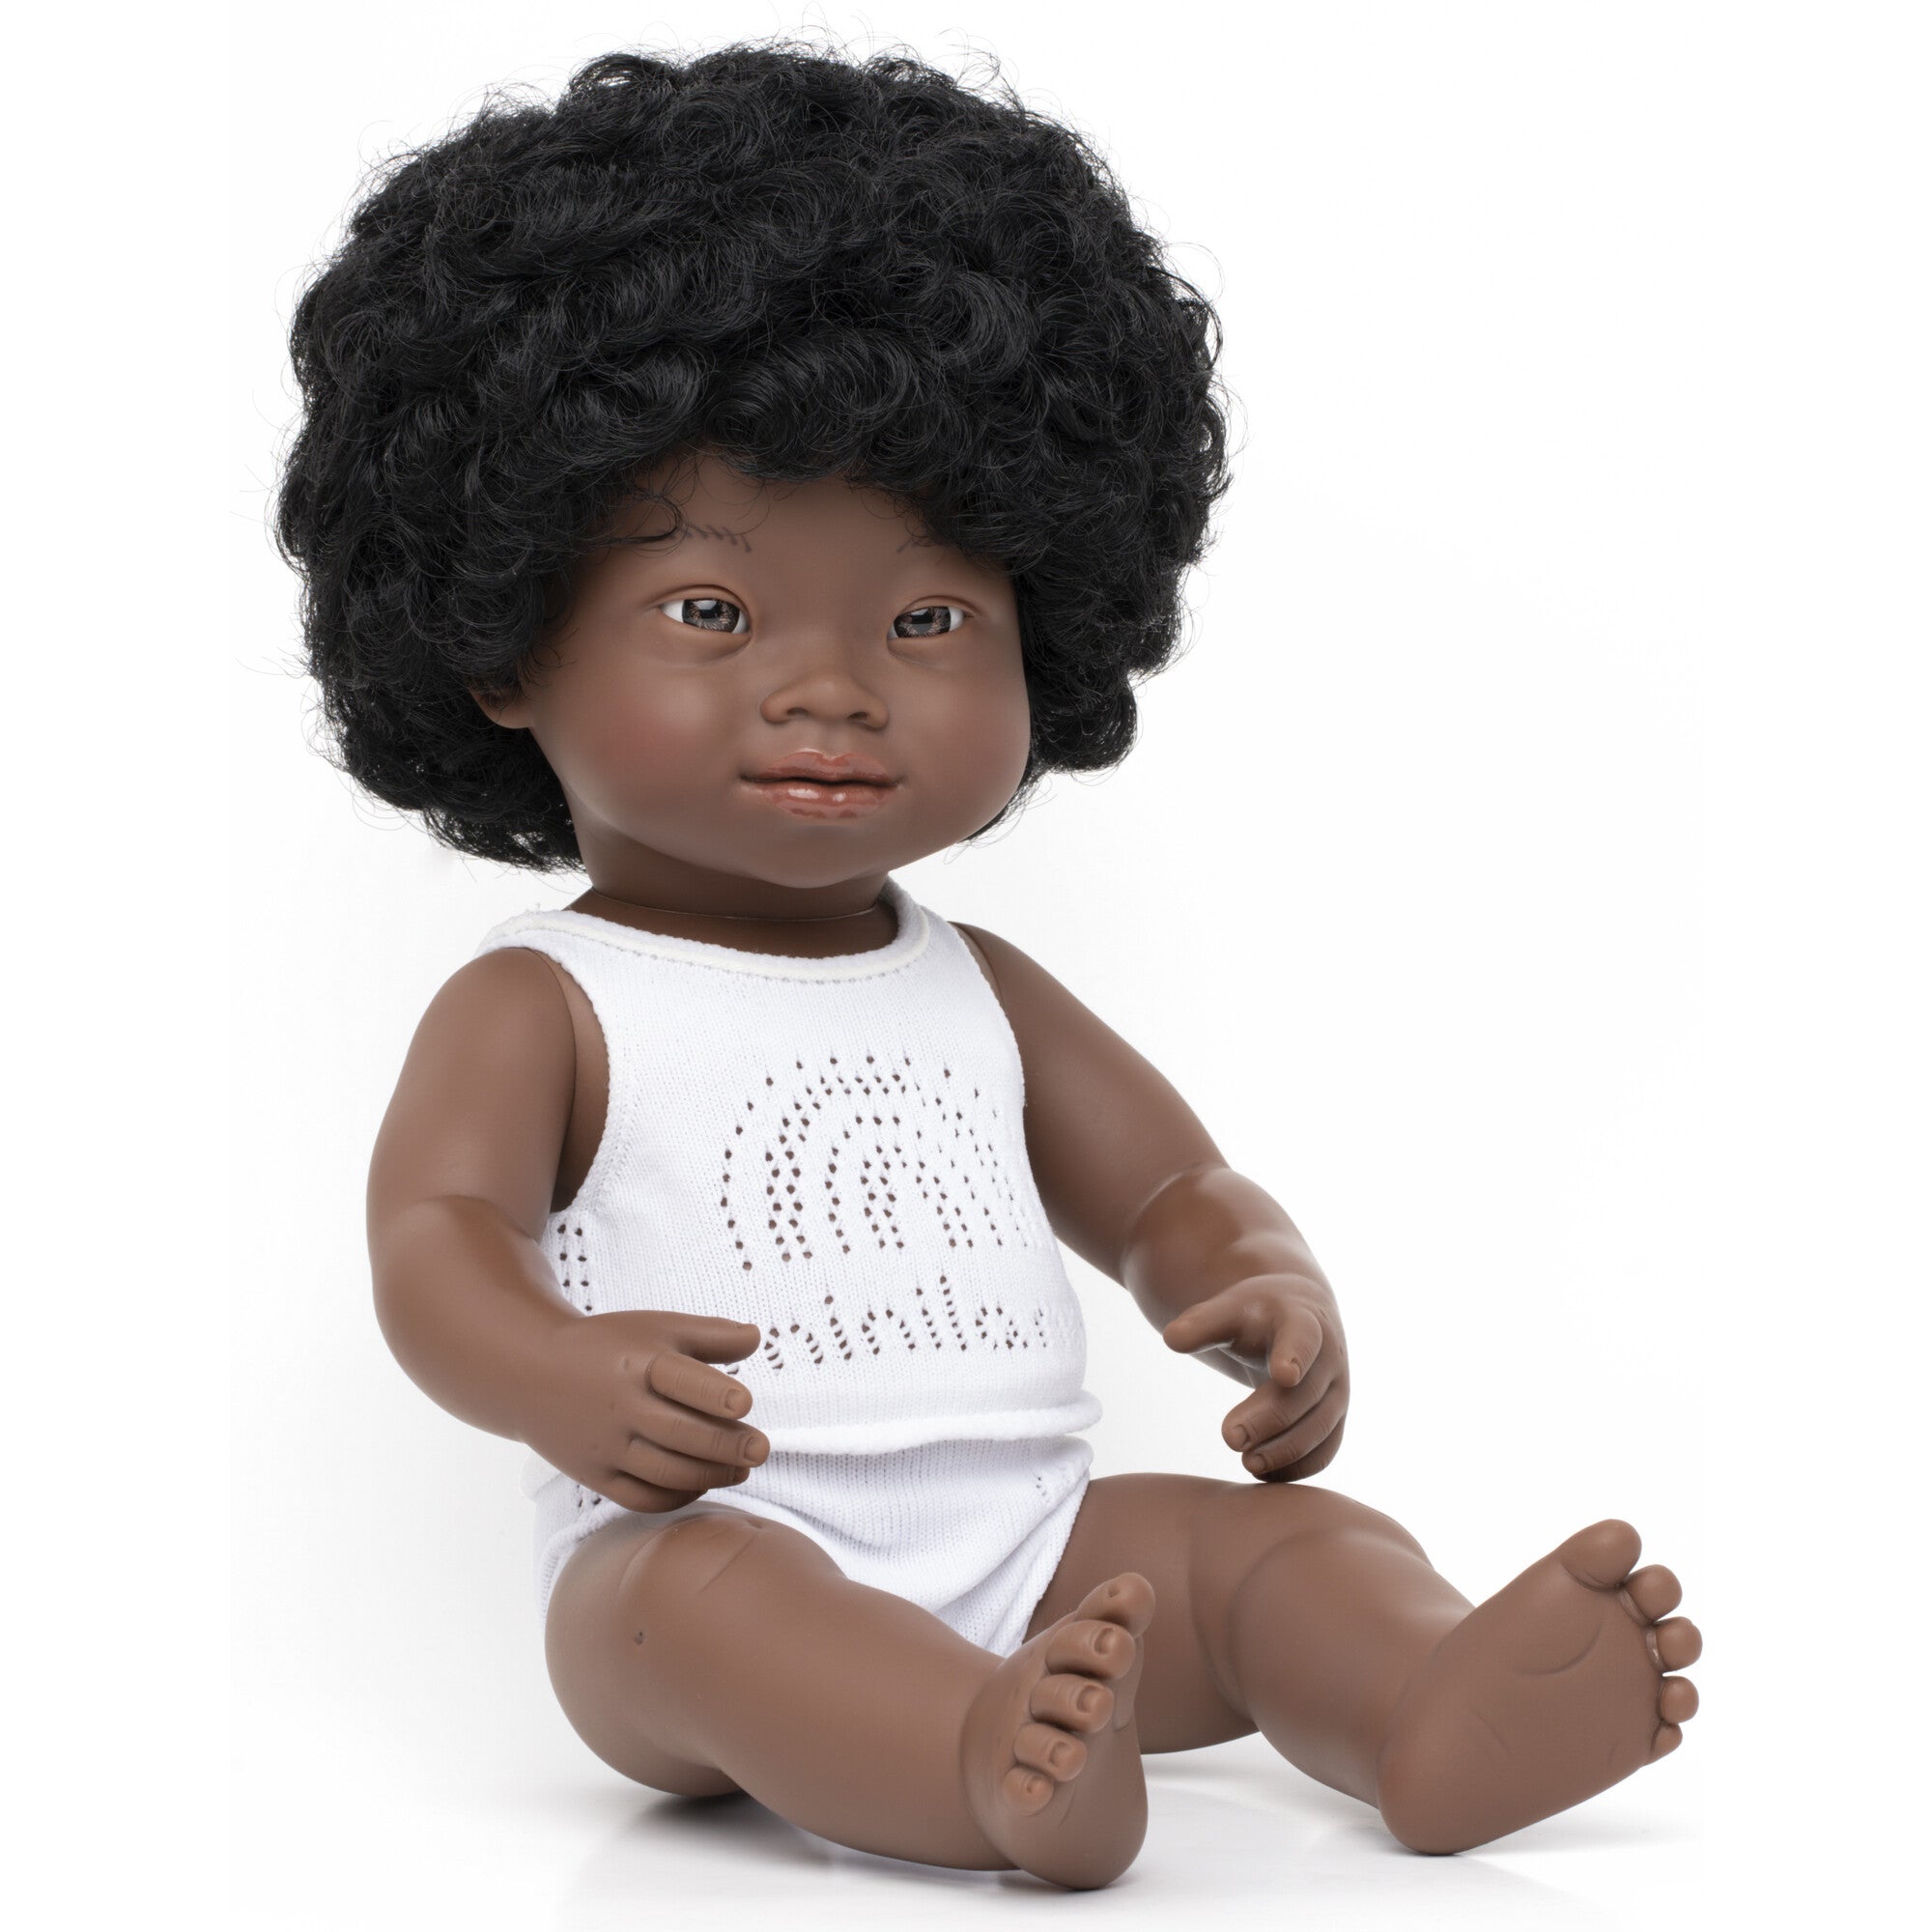 Miniland Baby Doll African Girl with Down Syndrome 15" Dolls